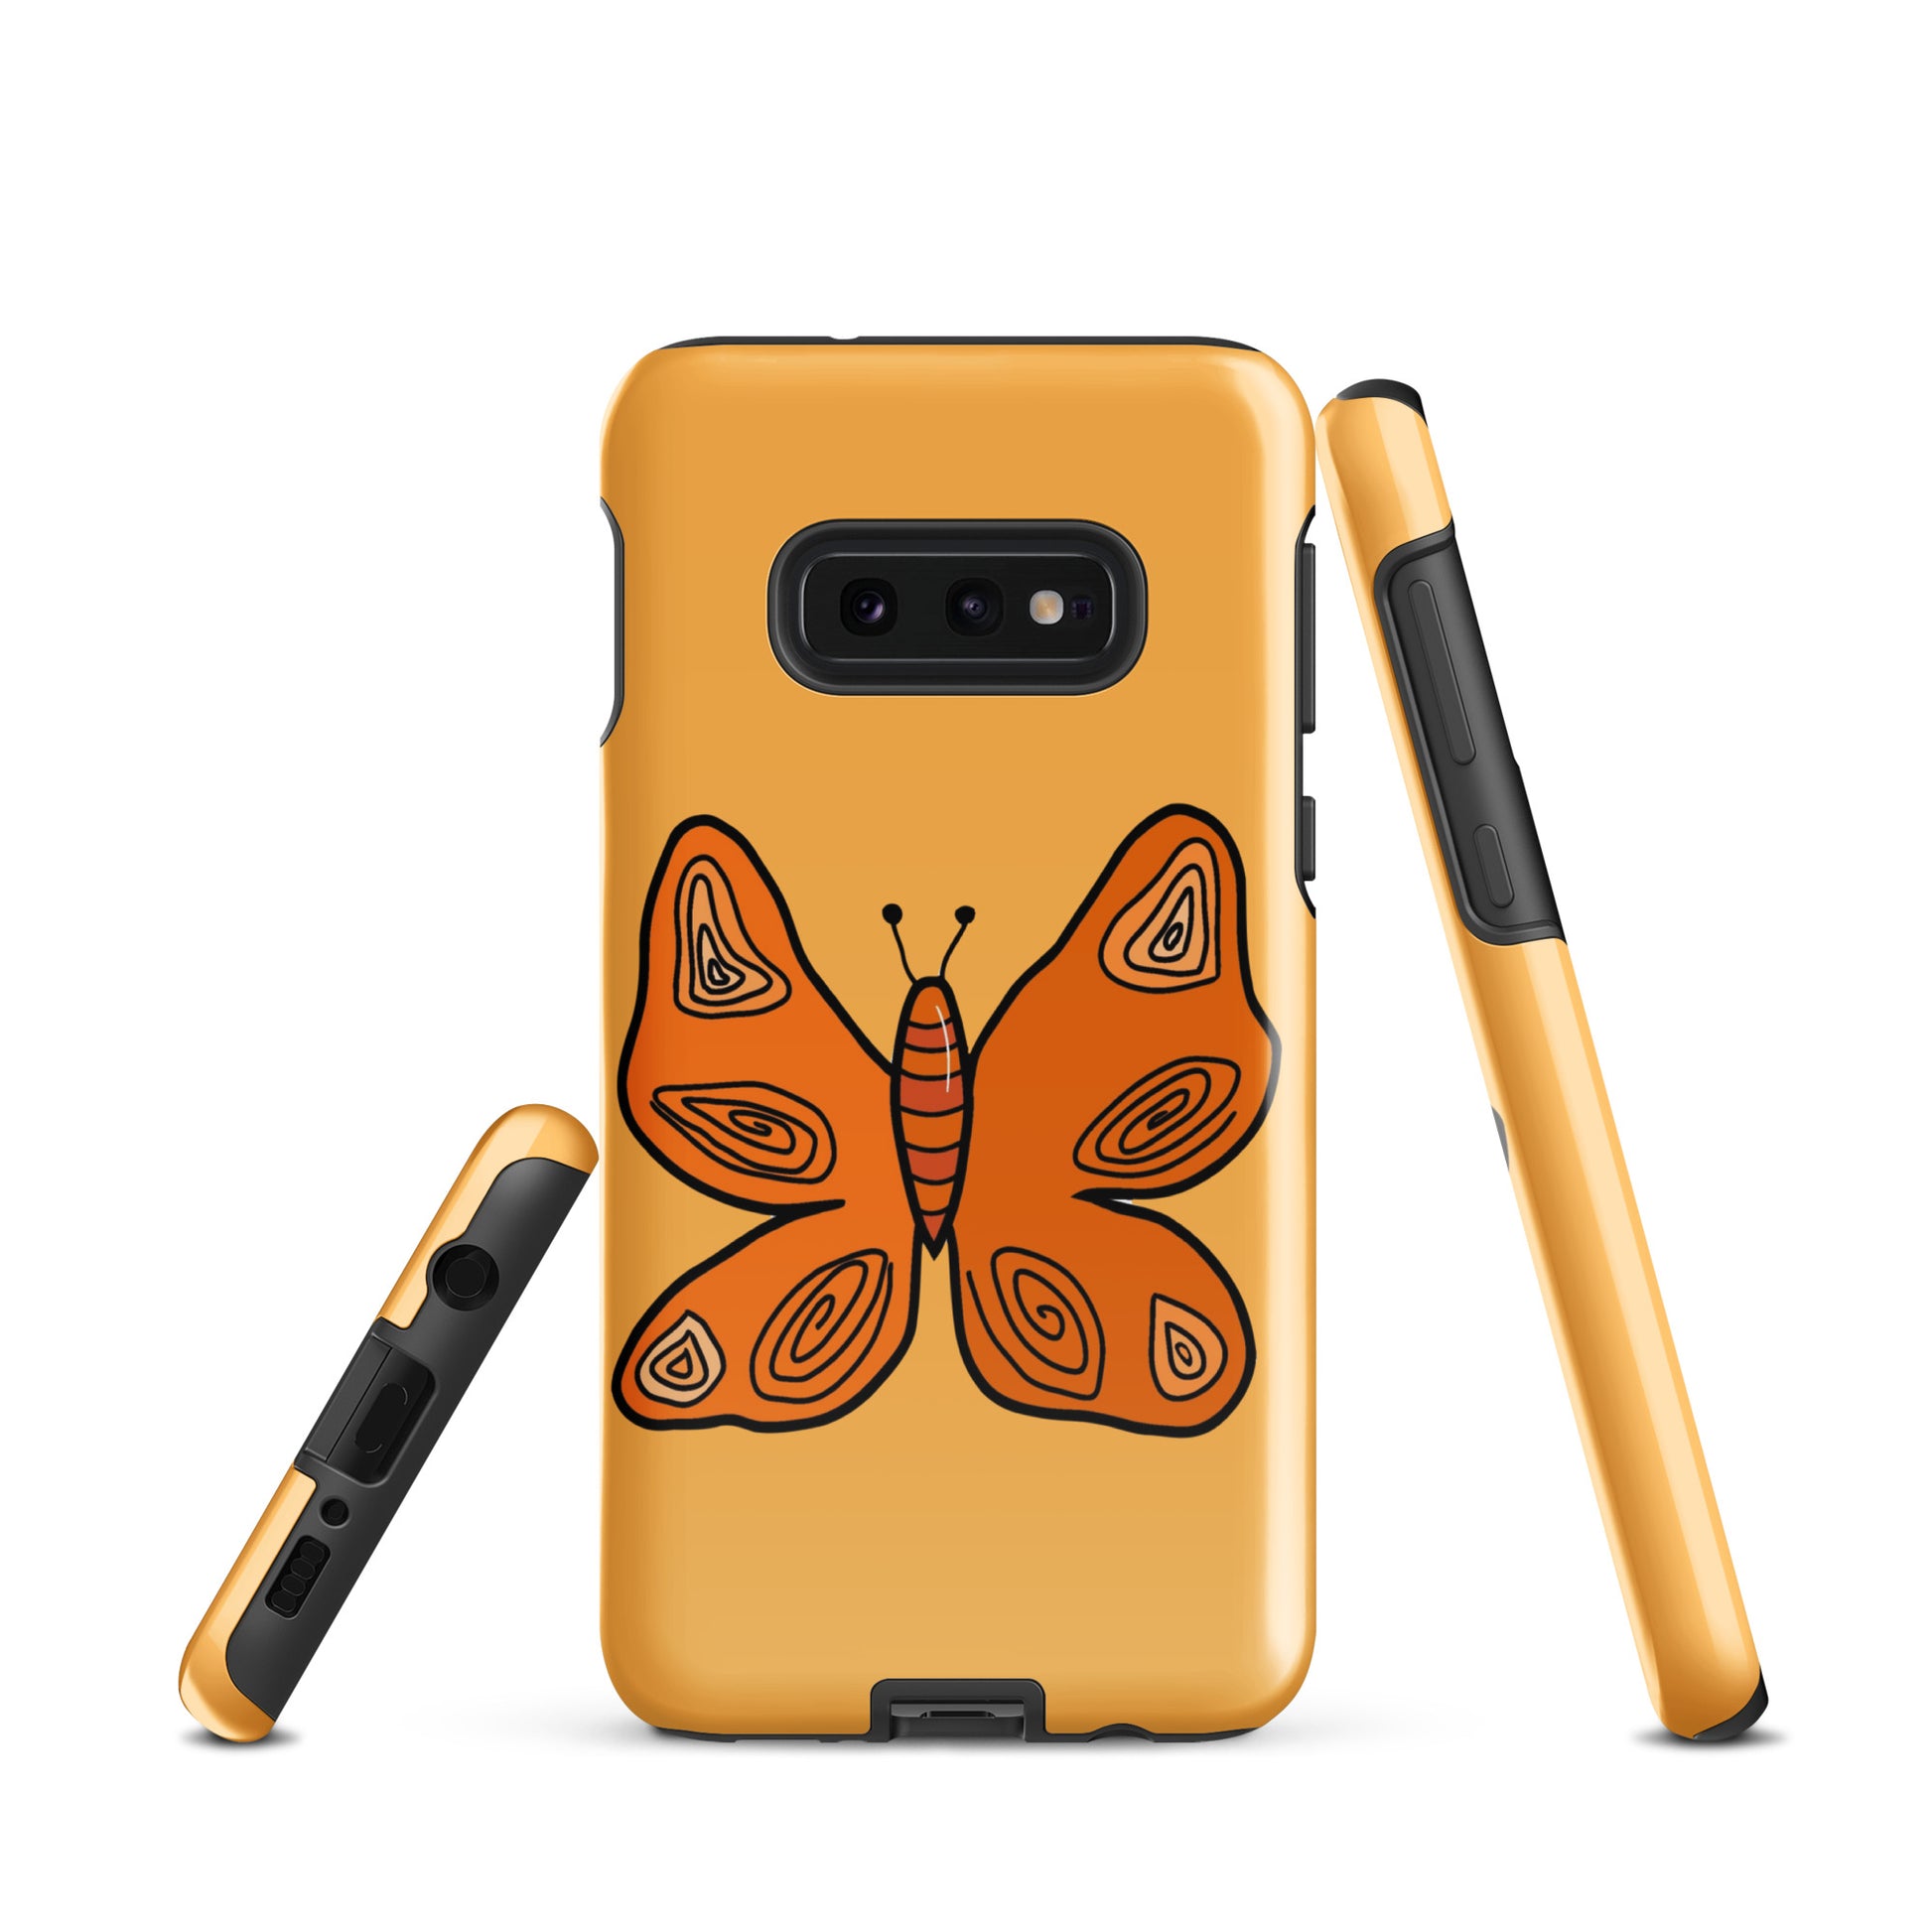 An Orange Butterfly Case for the Samsung Galaxy S10e